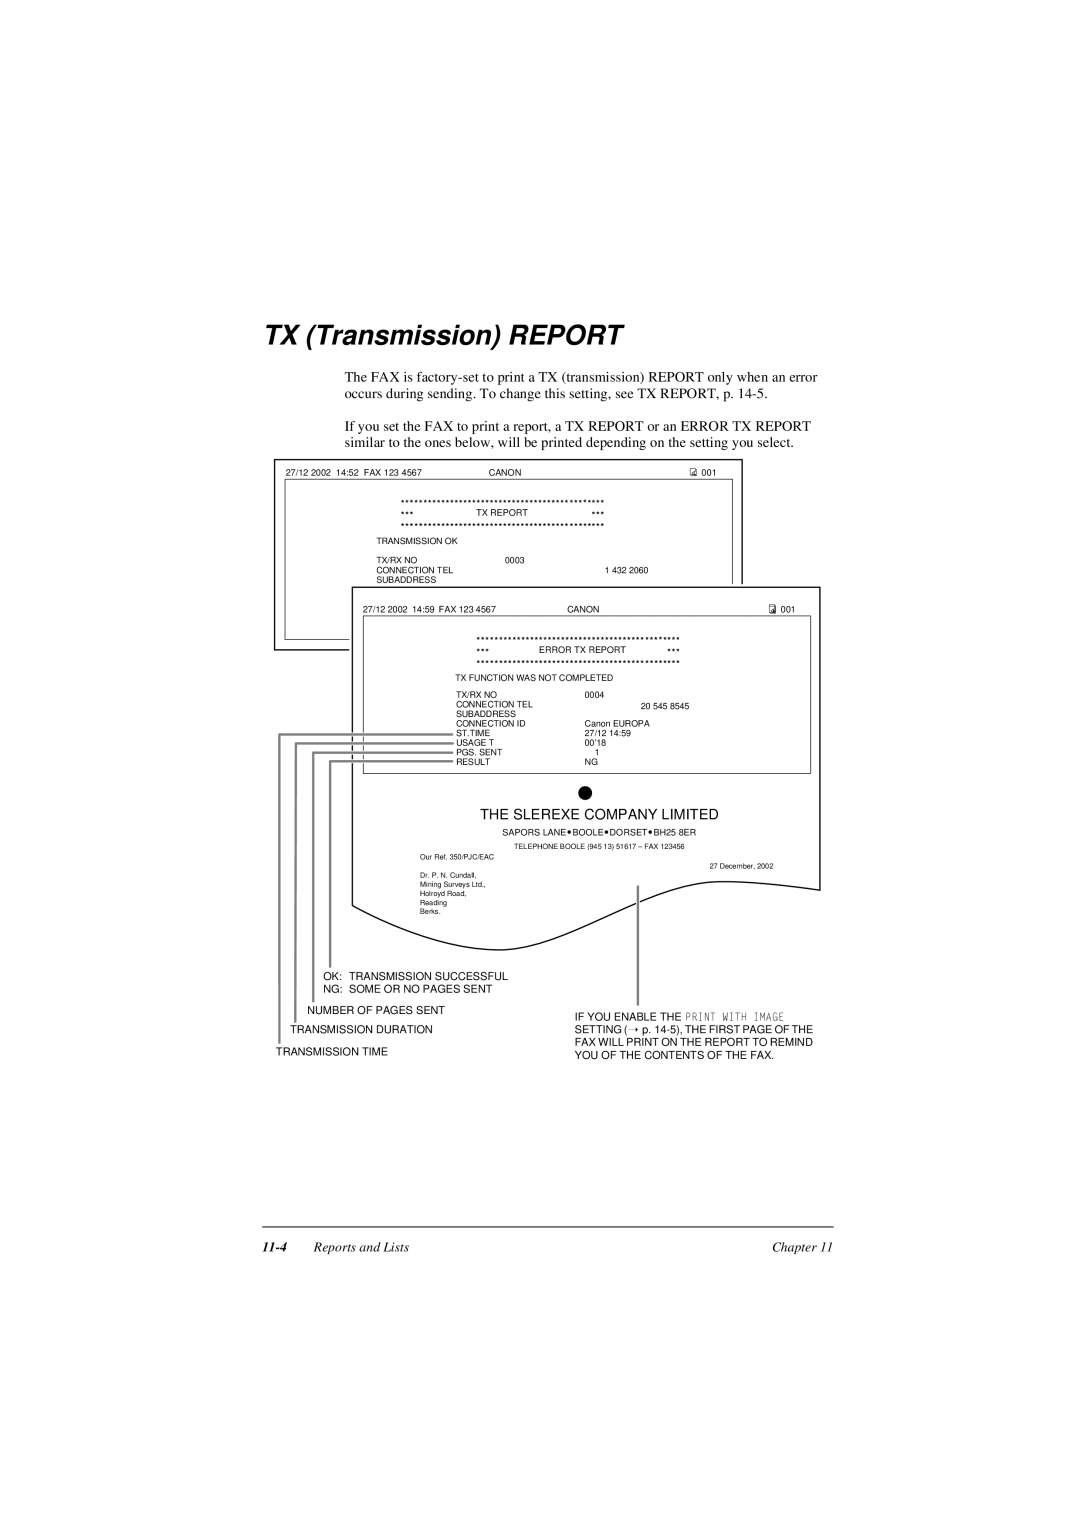 Canon L290, L240 manual TX Transmission REPORT, The Slerexe Company Limited, 11-4, Reports and Lists 